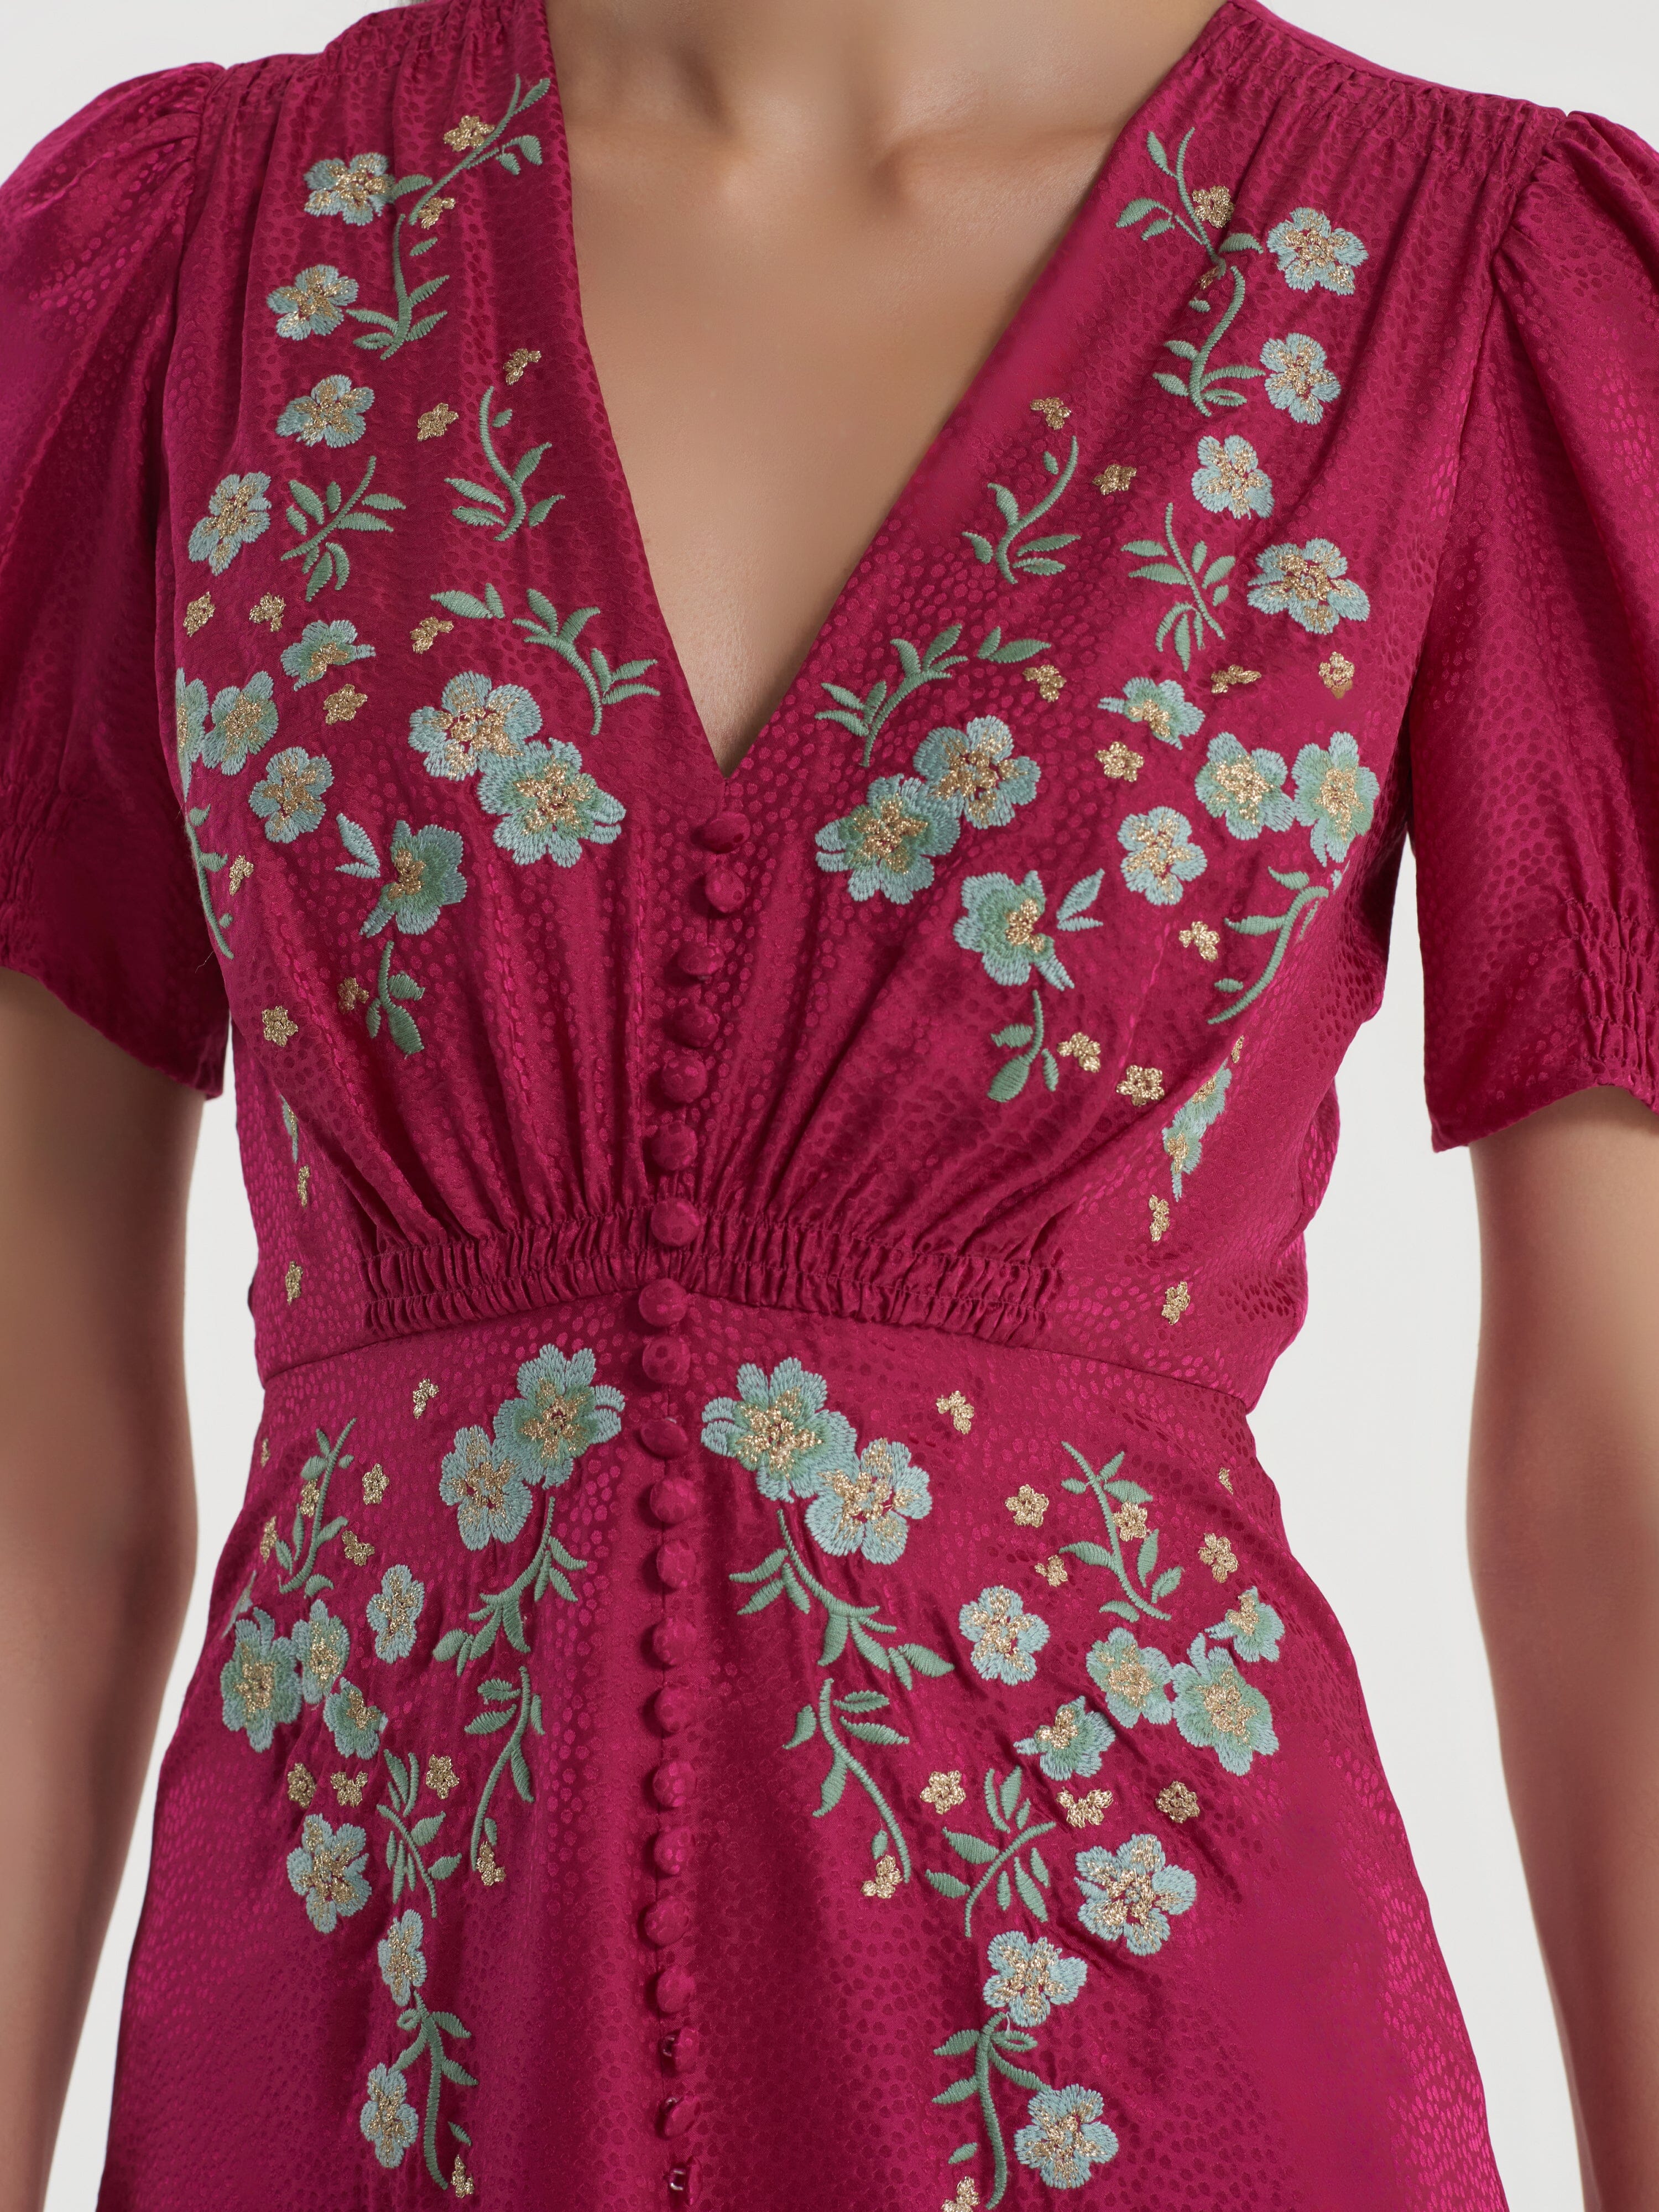 Lea Dress in Summerberry Jade Embroidered